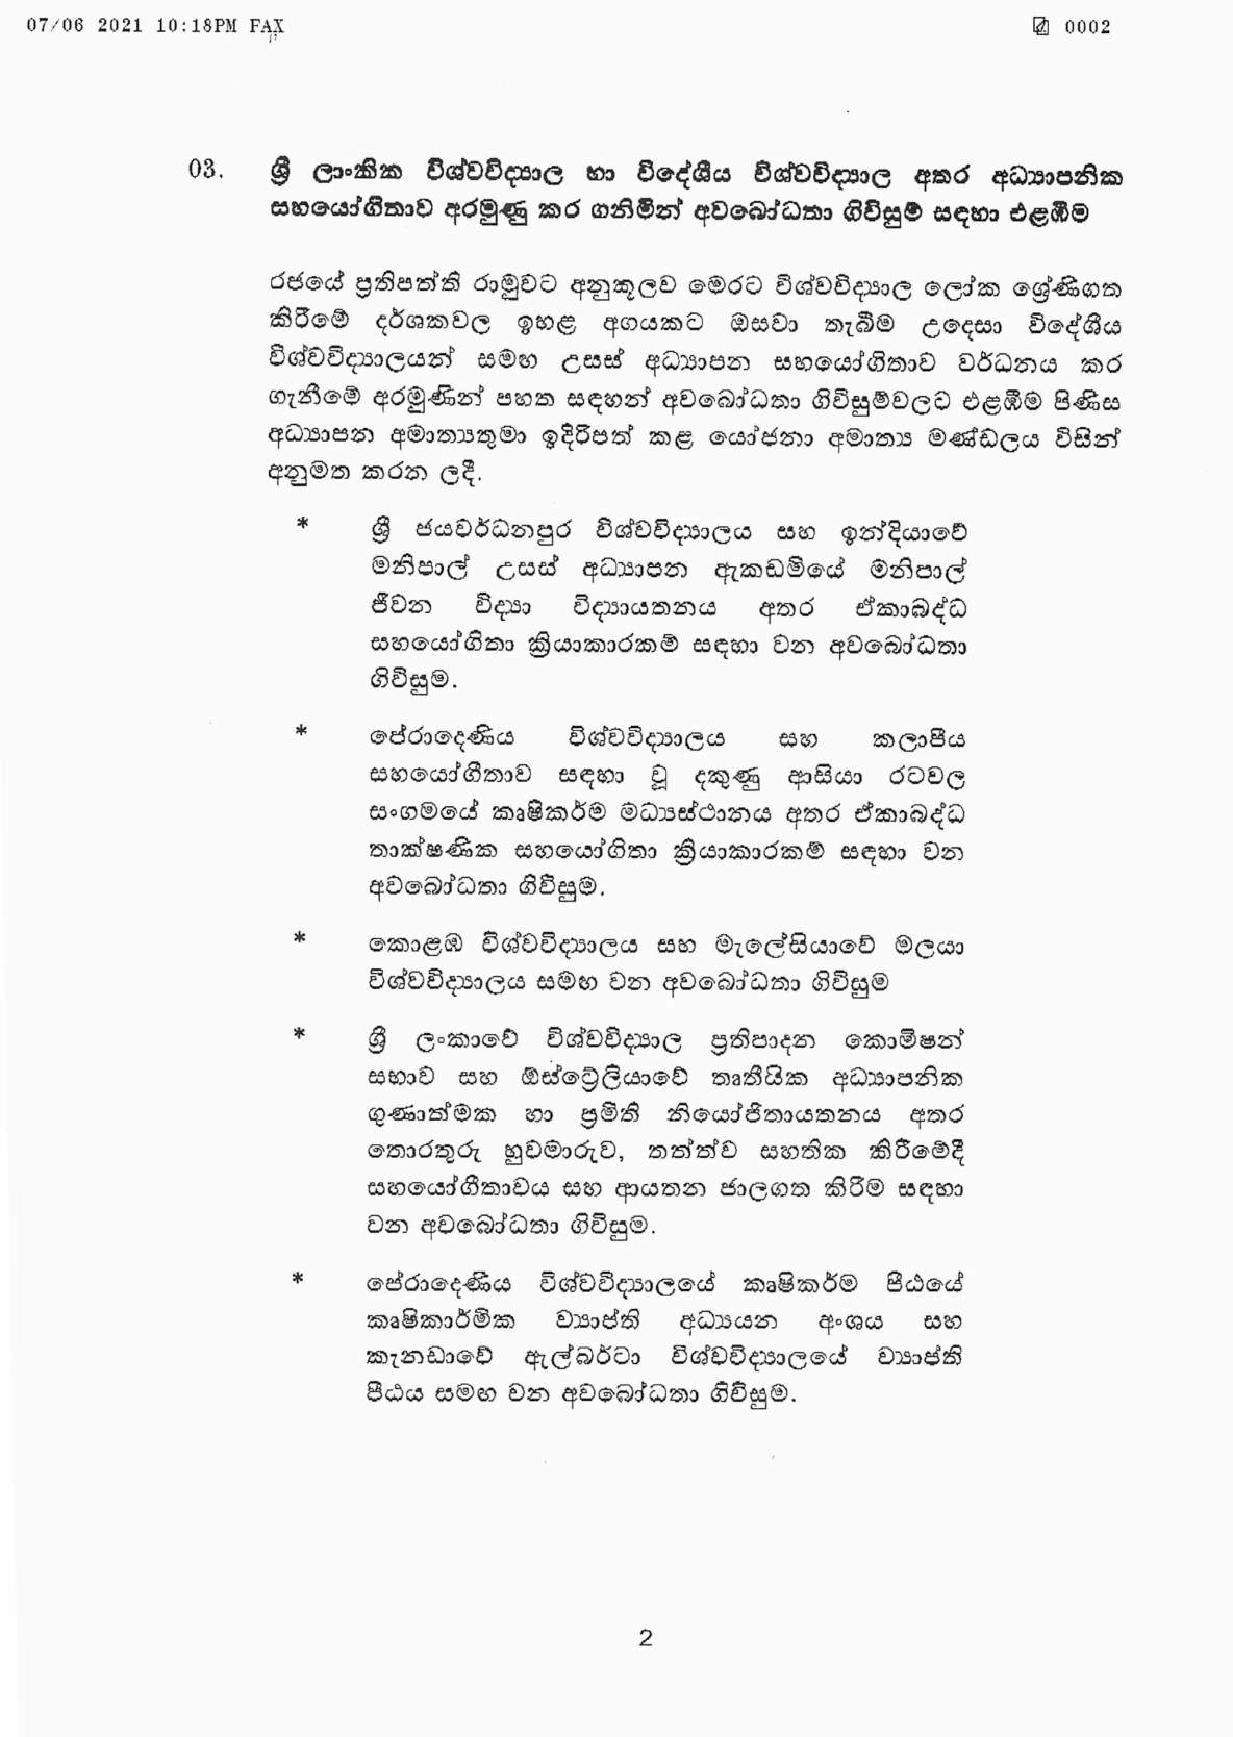 Cabinet Decisions on 07.06.2021 page 002